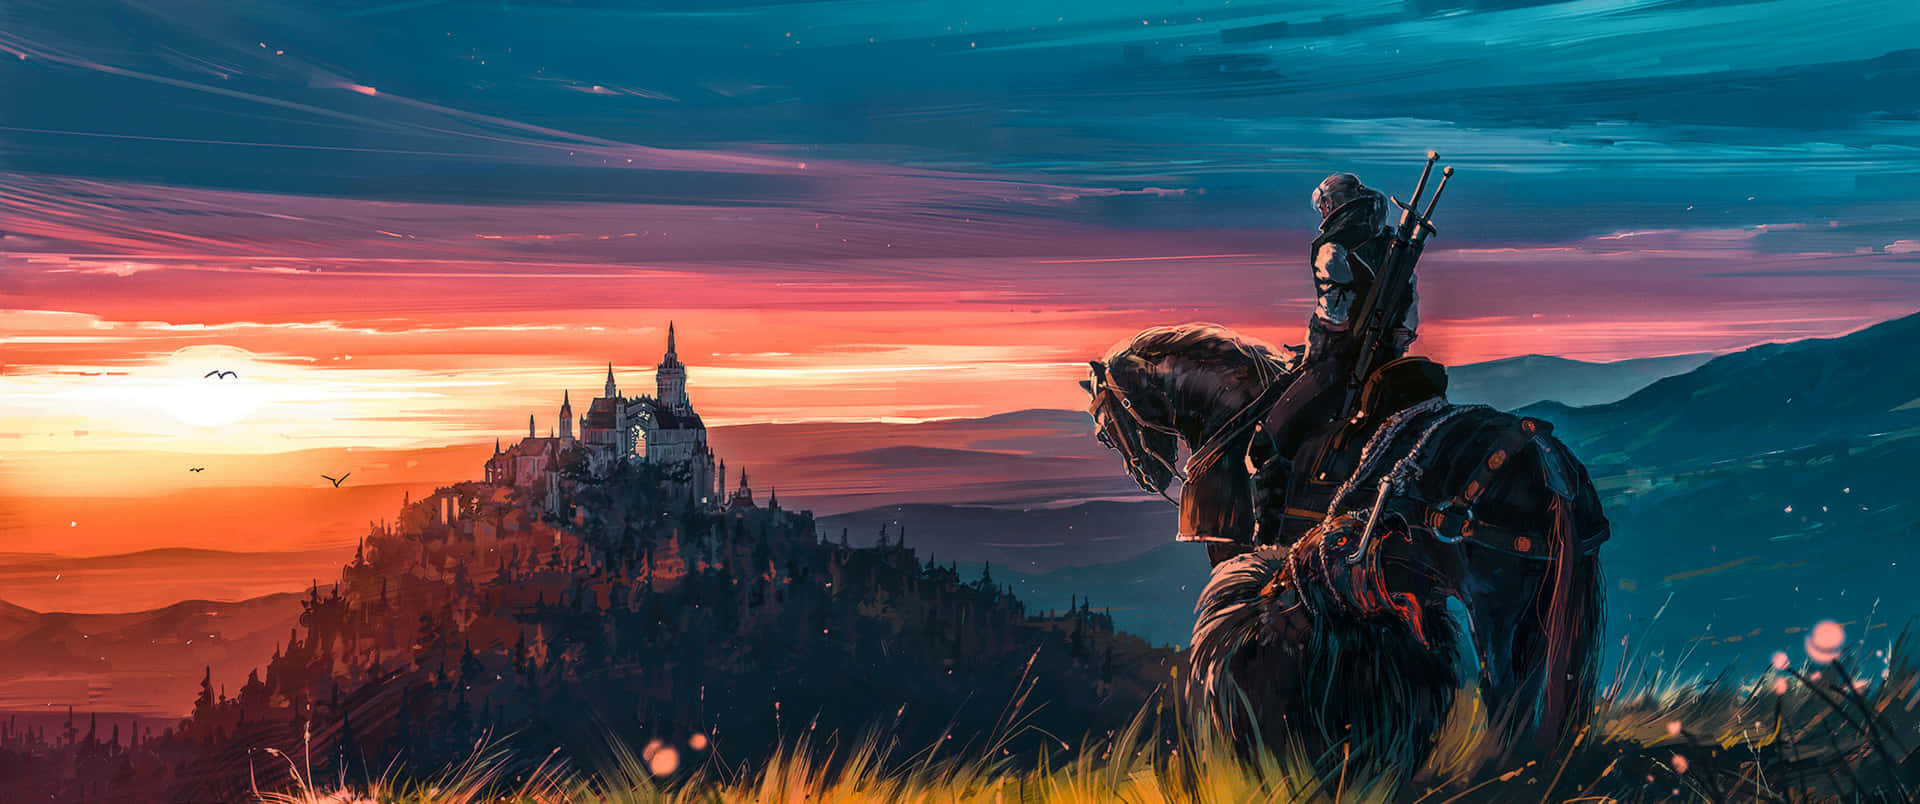 3440x1440 Witcher Castle On A Mountain Wallpaper